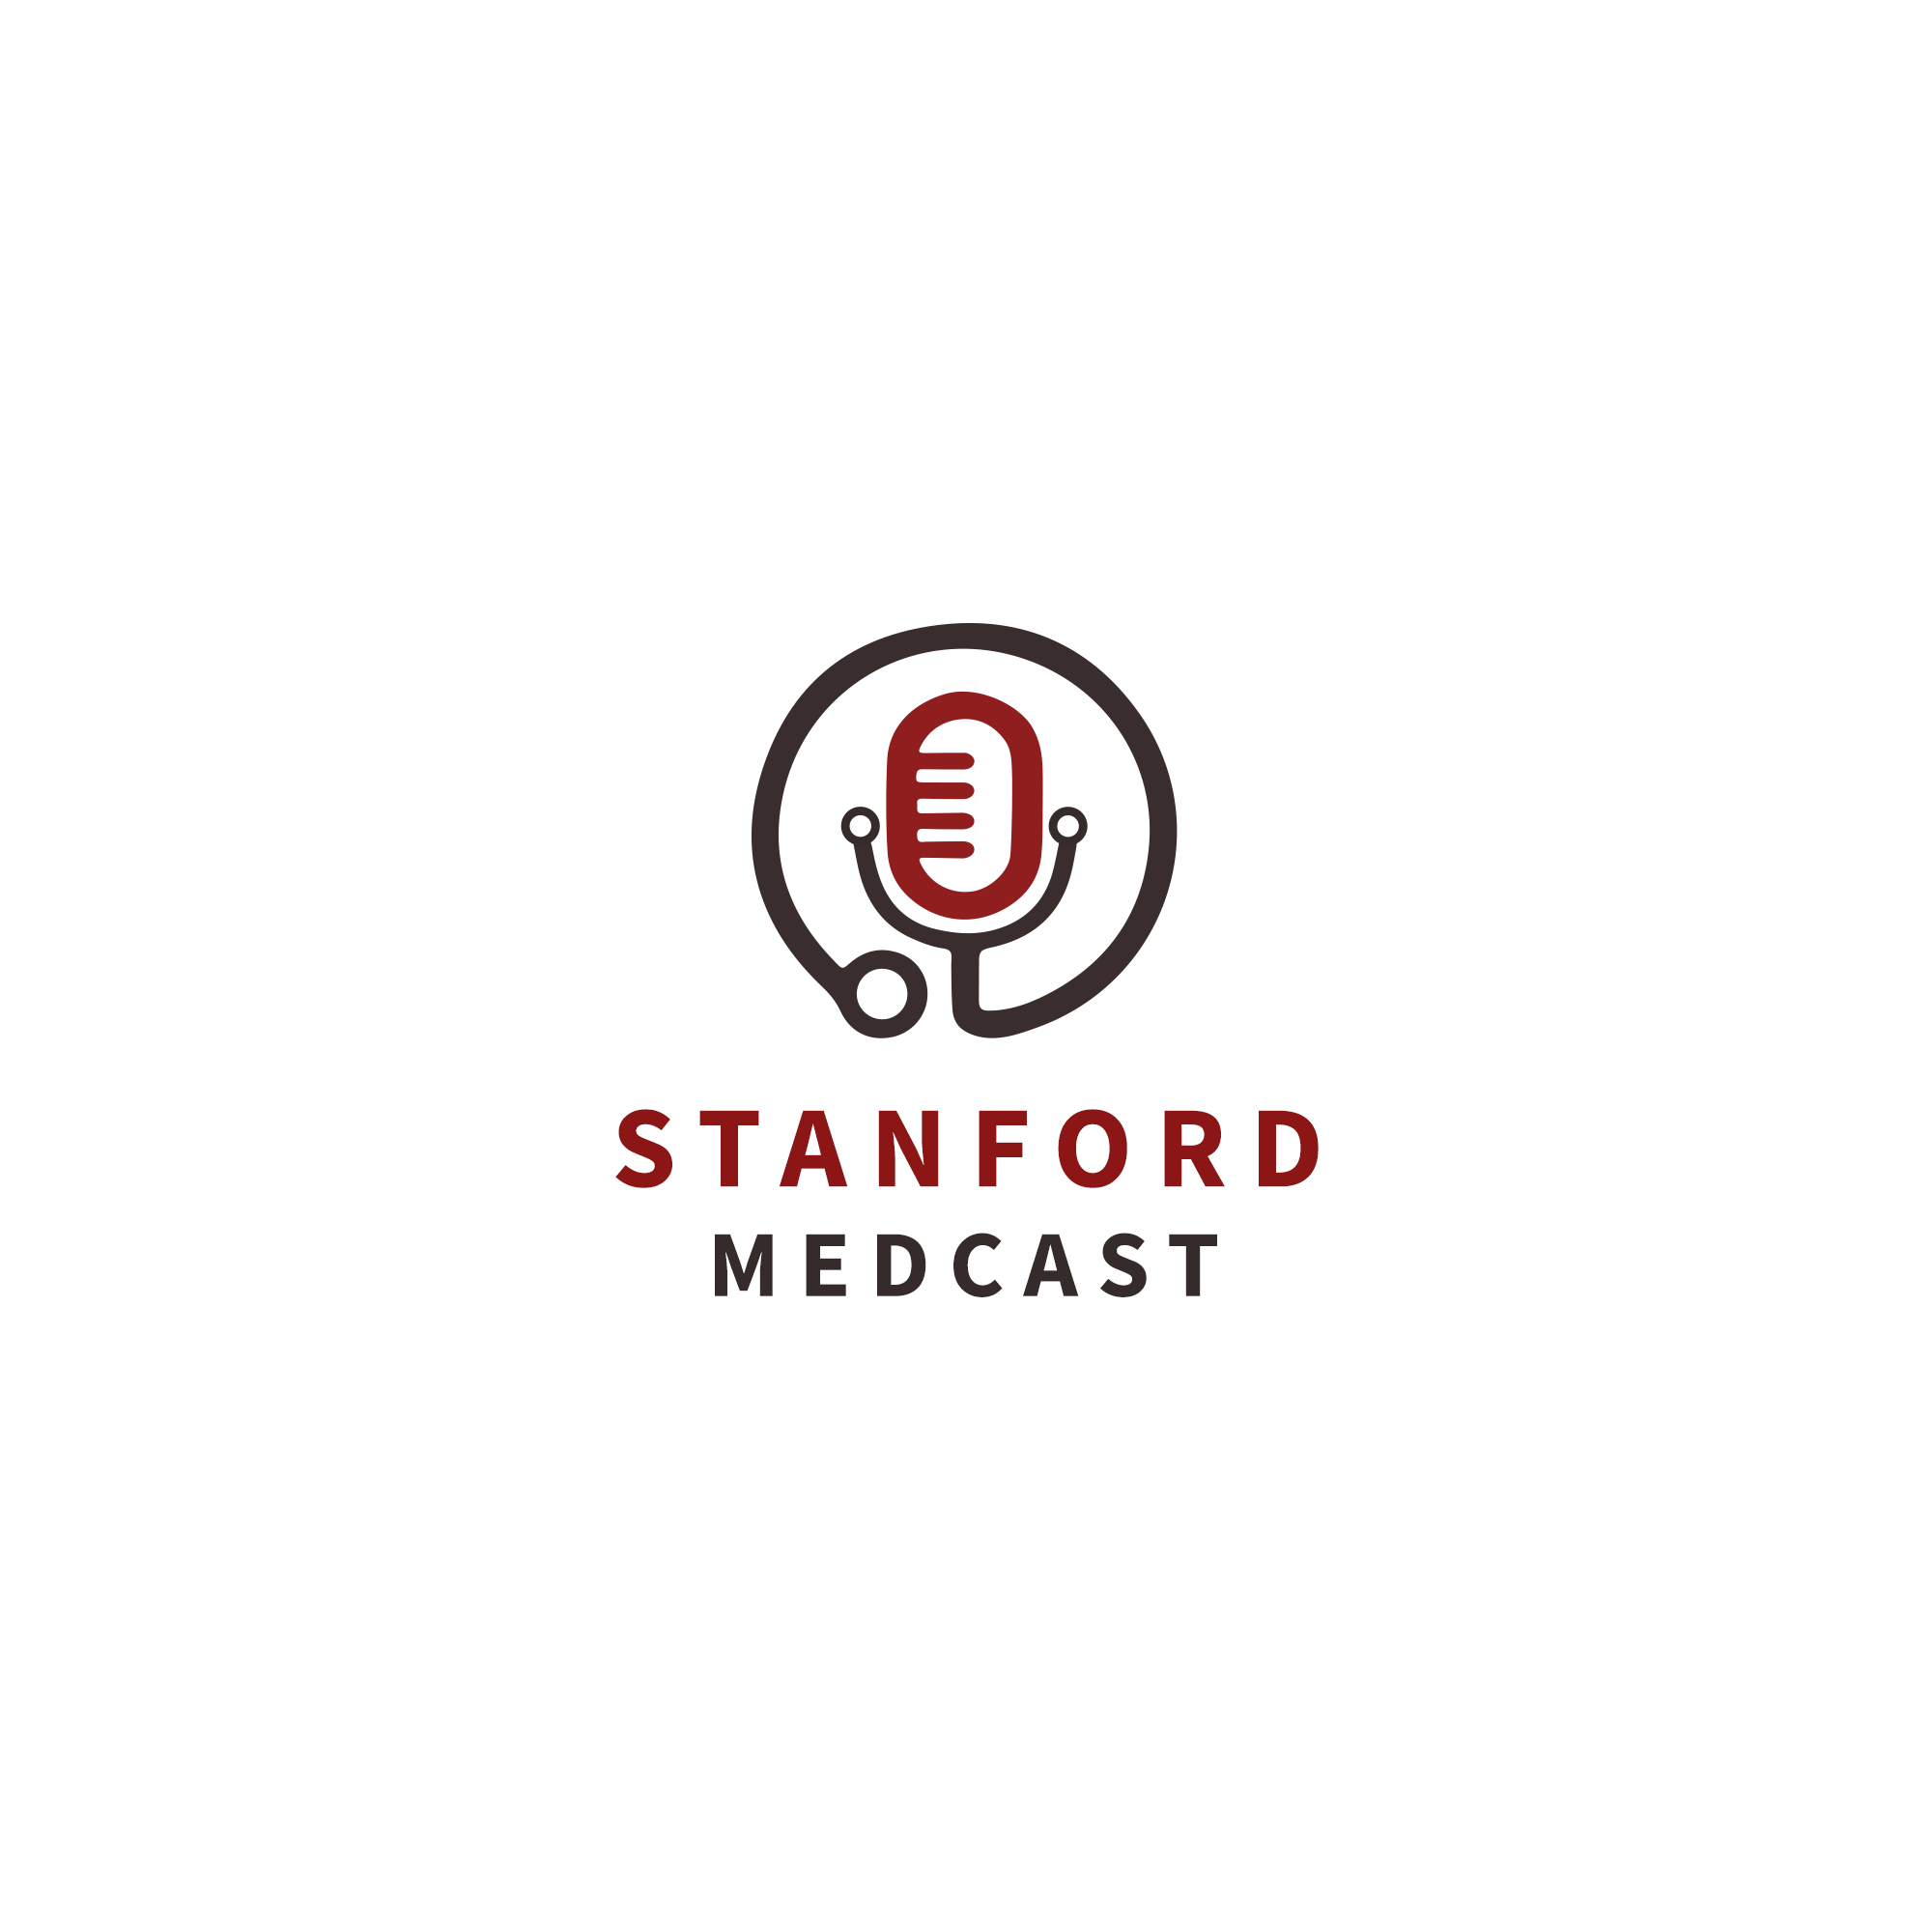 Stanford Medcast Episode 35: The Afterword - Operationalizing Racial Justice Banner